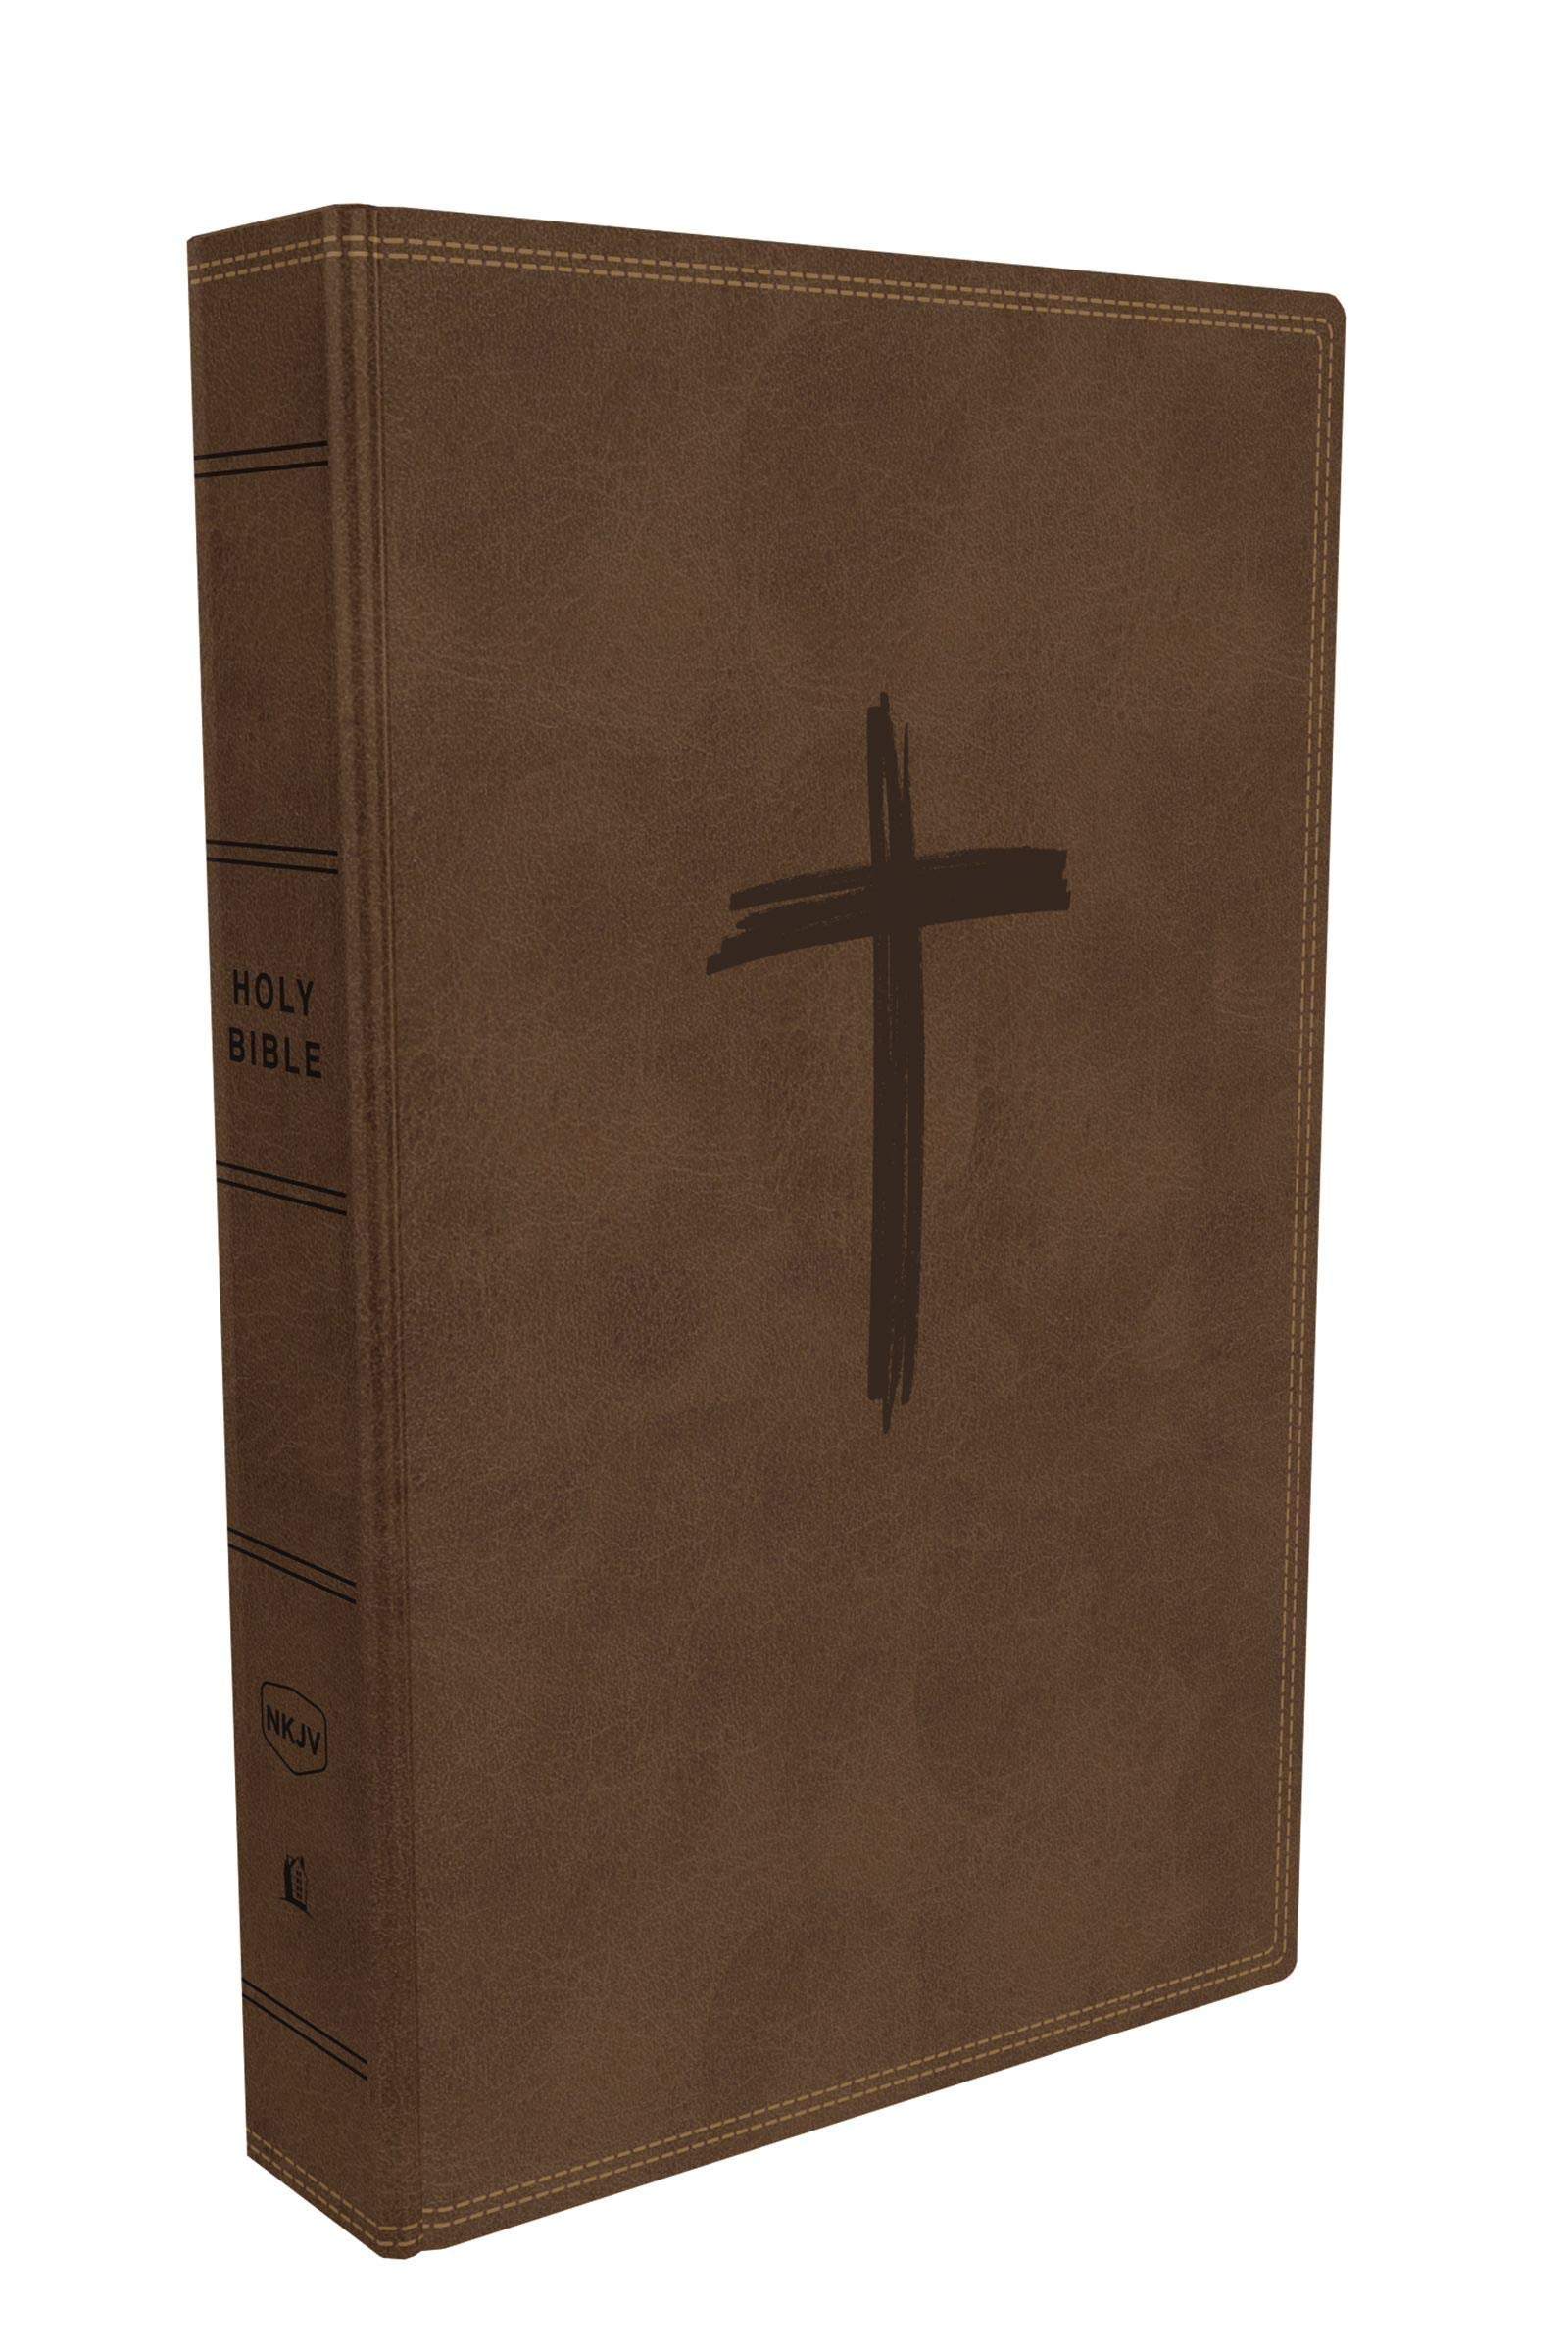 NKJV Holy Bible for Kids Brown Leathersoft by Thomas Nelson